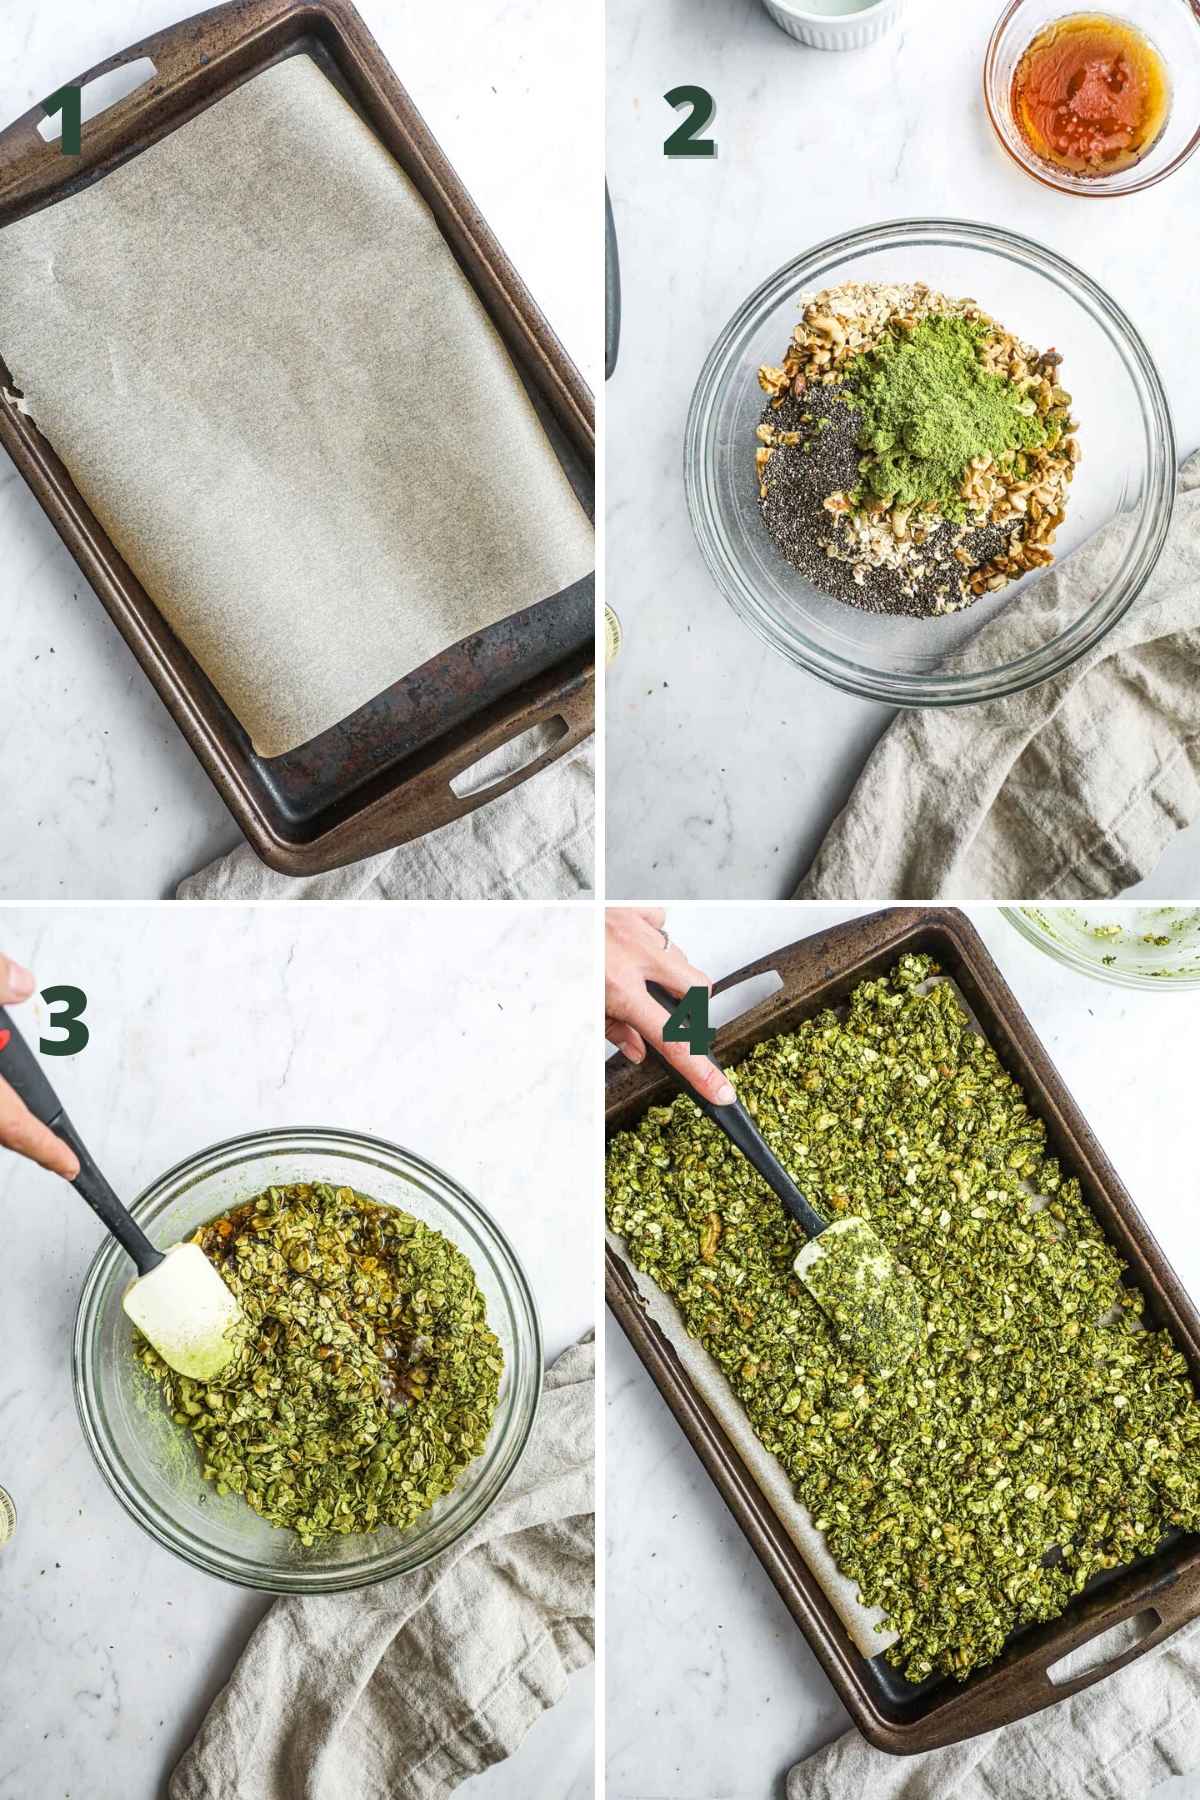 Steps to make gluten-free matcha granola, including lining a baking sheet with parchment paper, mixing the dry and wet ingredients, spreading the granola on a baking sheet, and stirring halfway through.